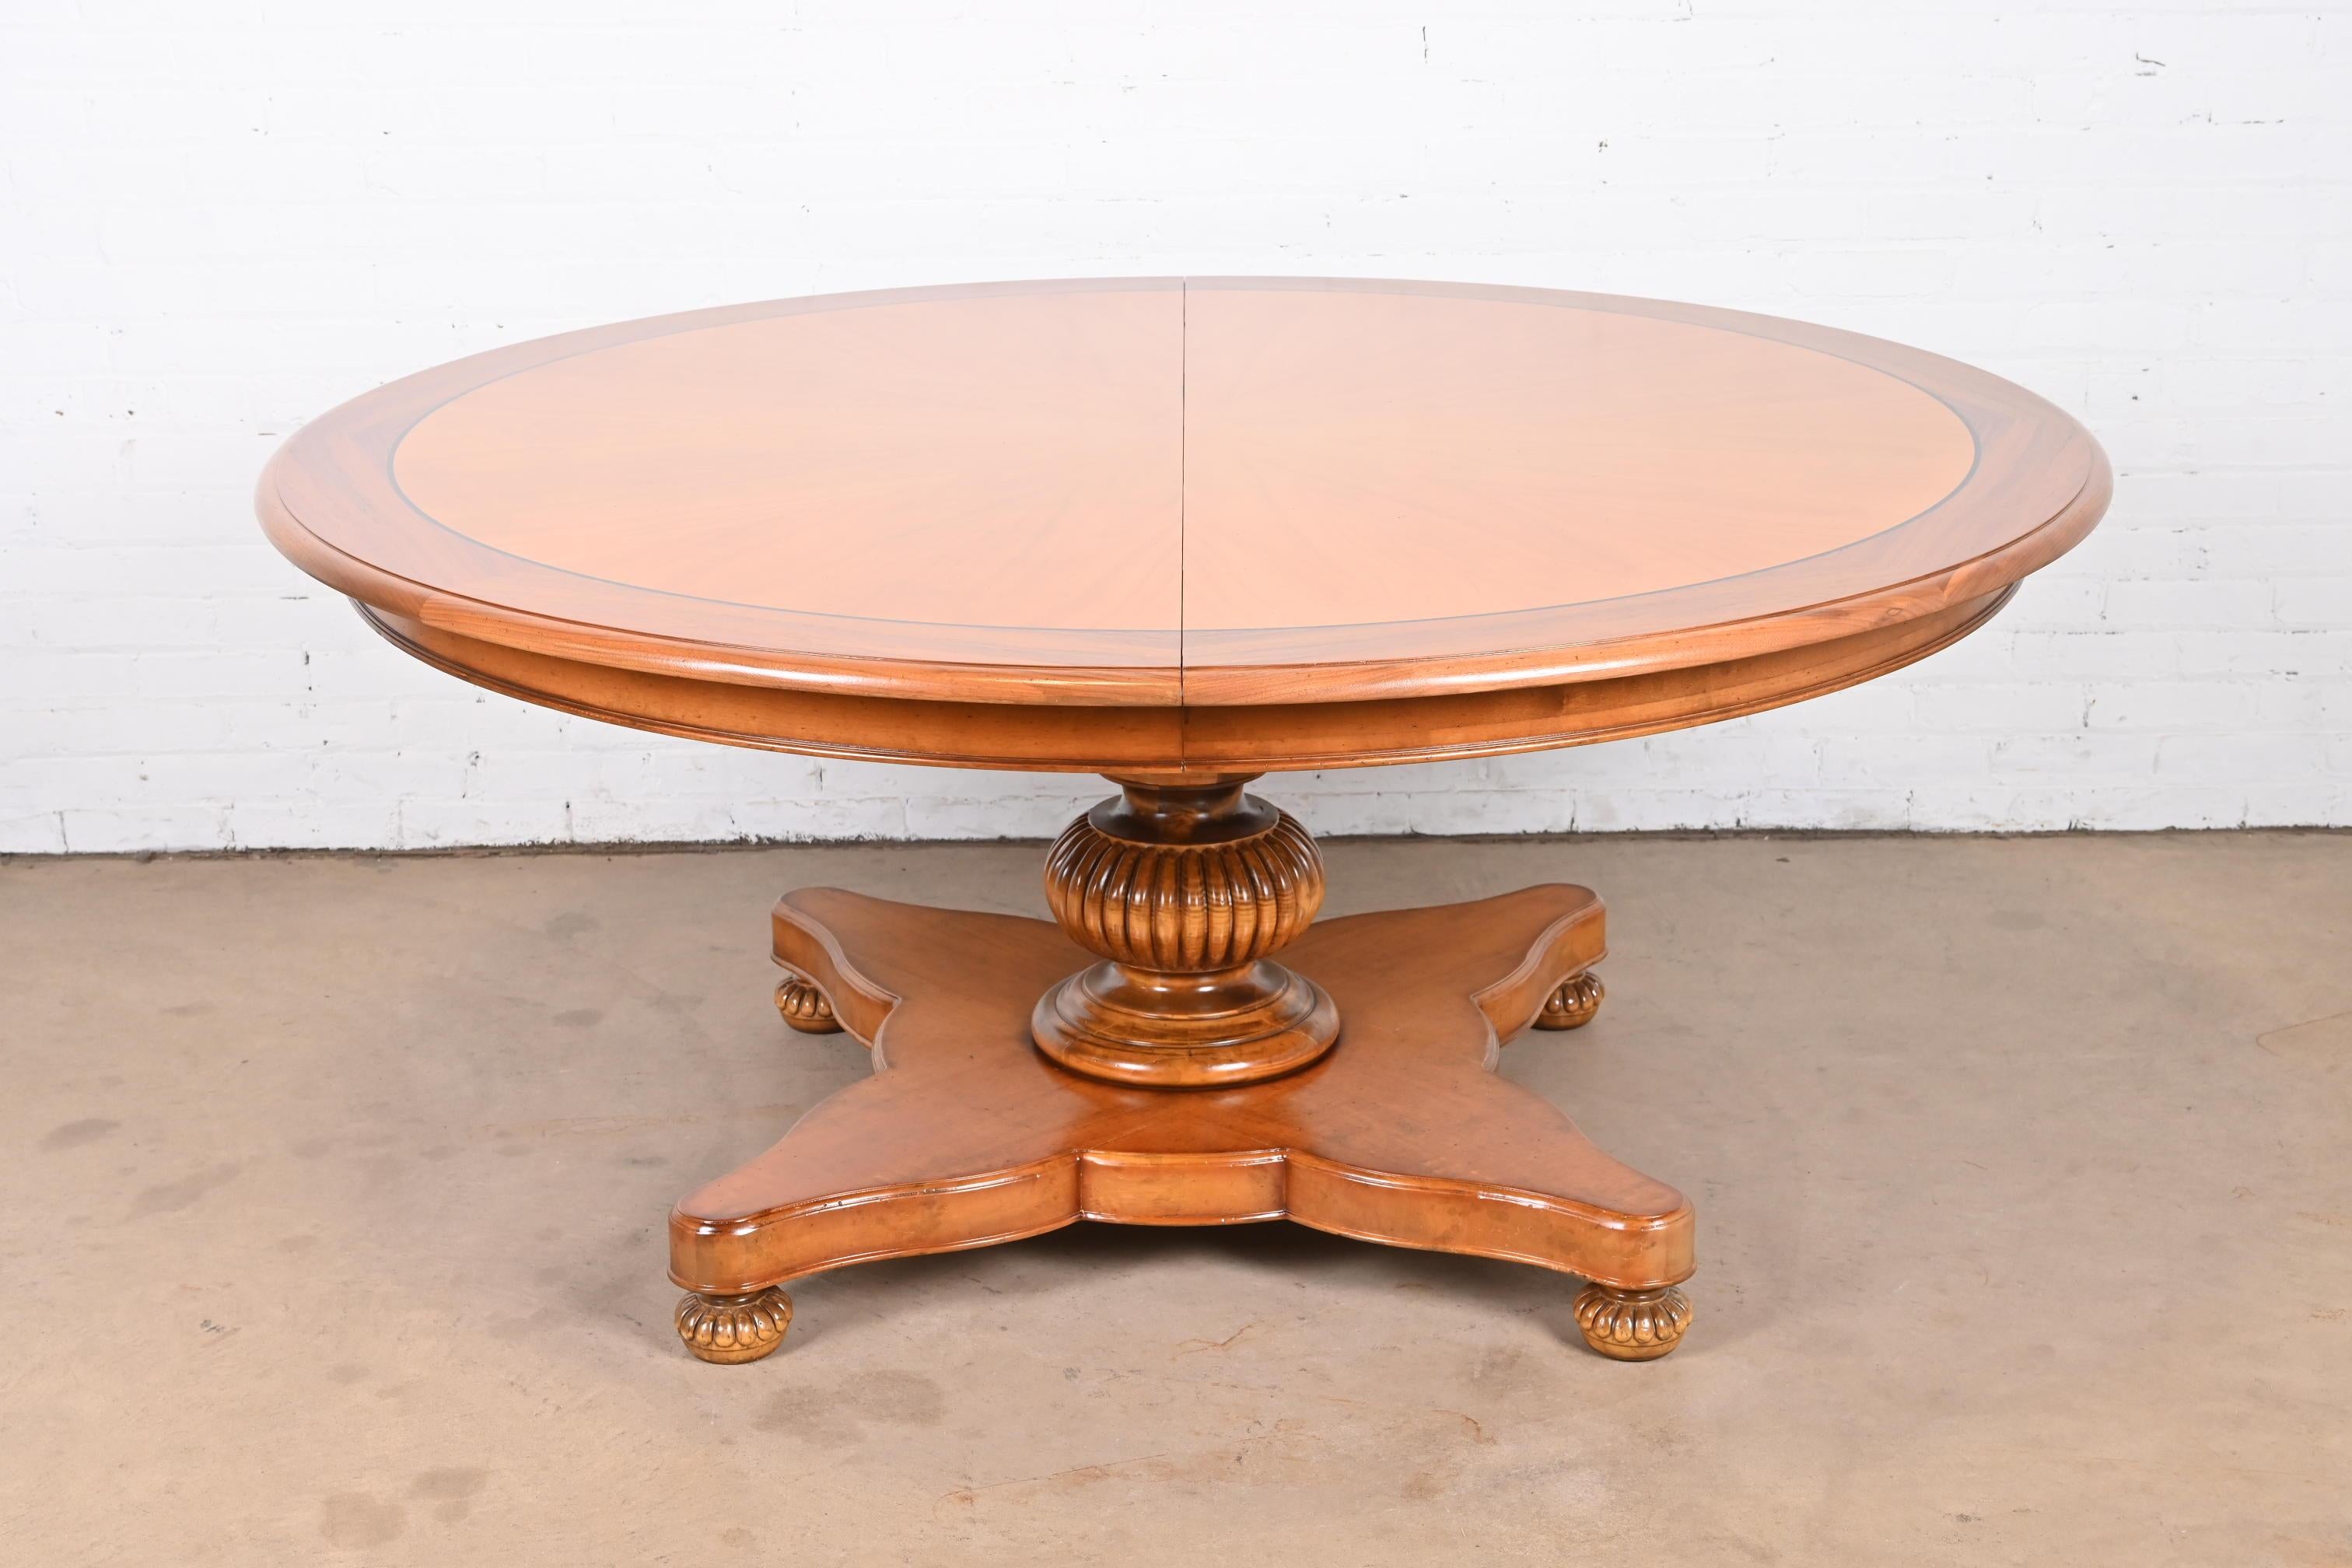 An outstanding large Italian Provincial or Neoclassical style pedestal extension dining table

By Baker Furniture, 